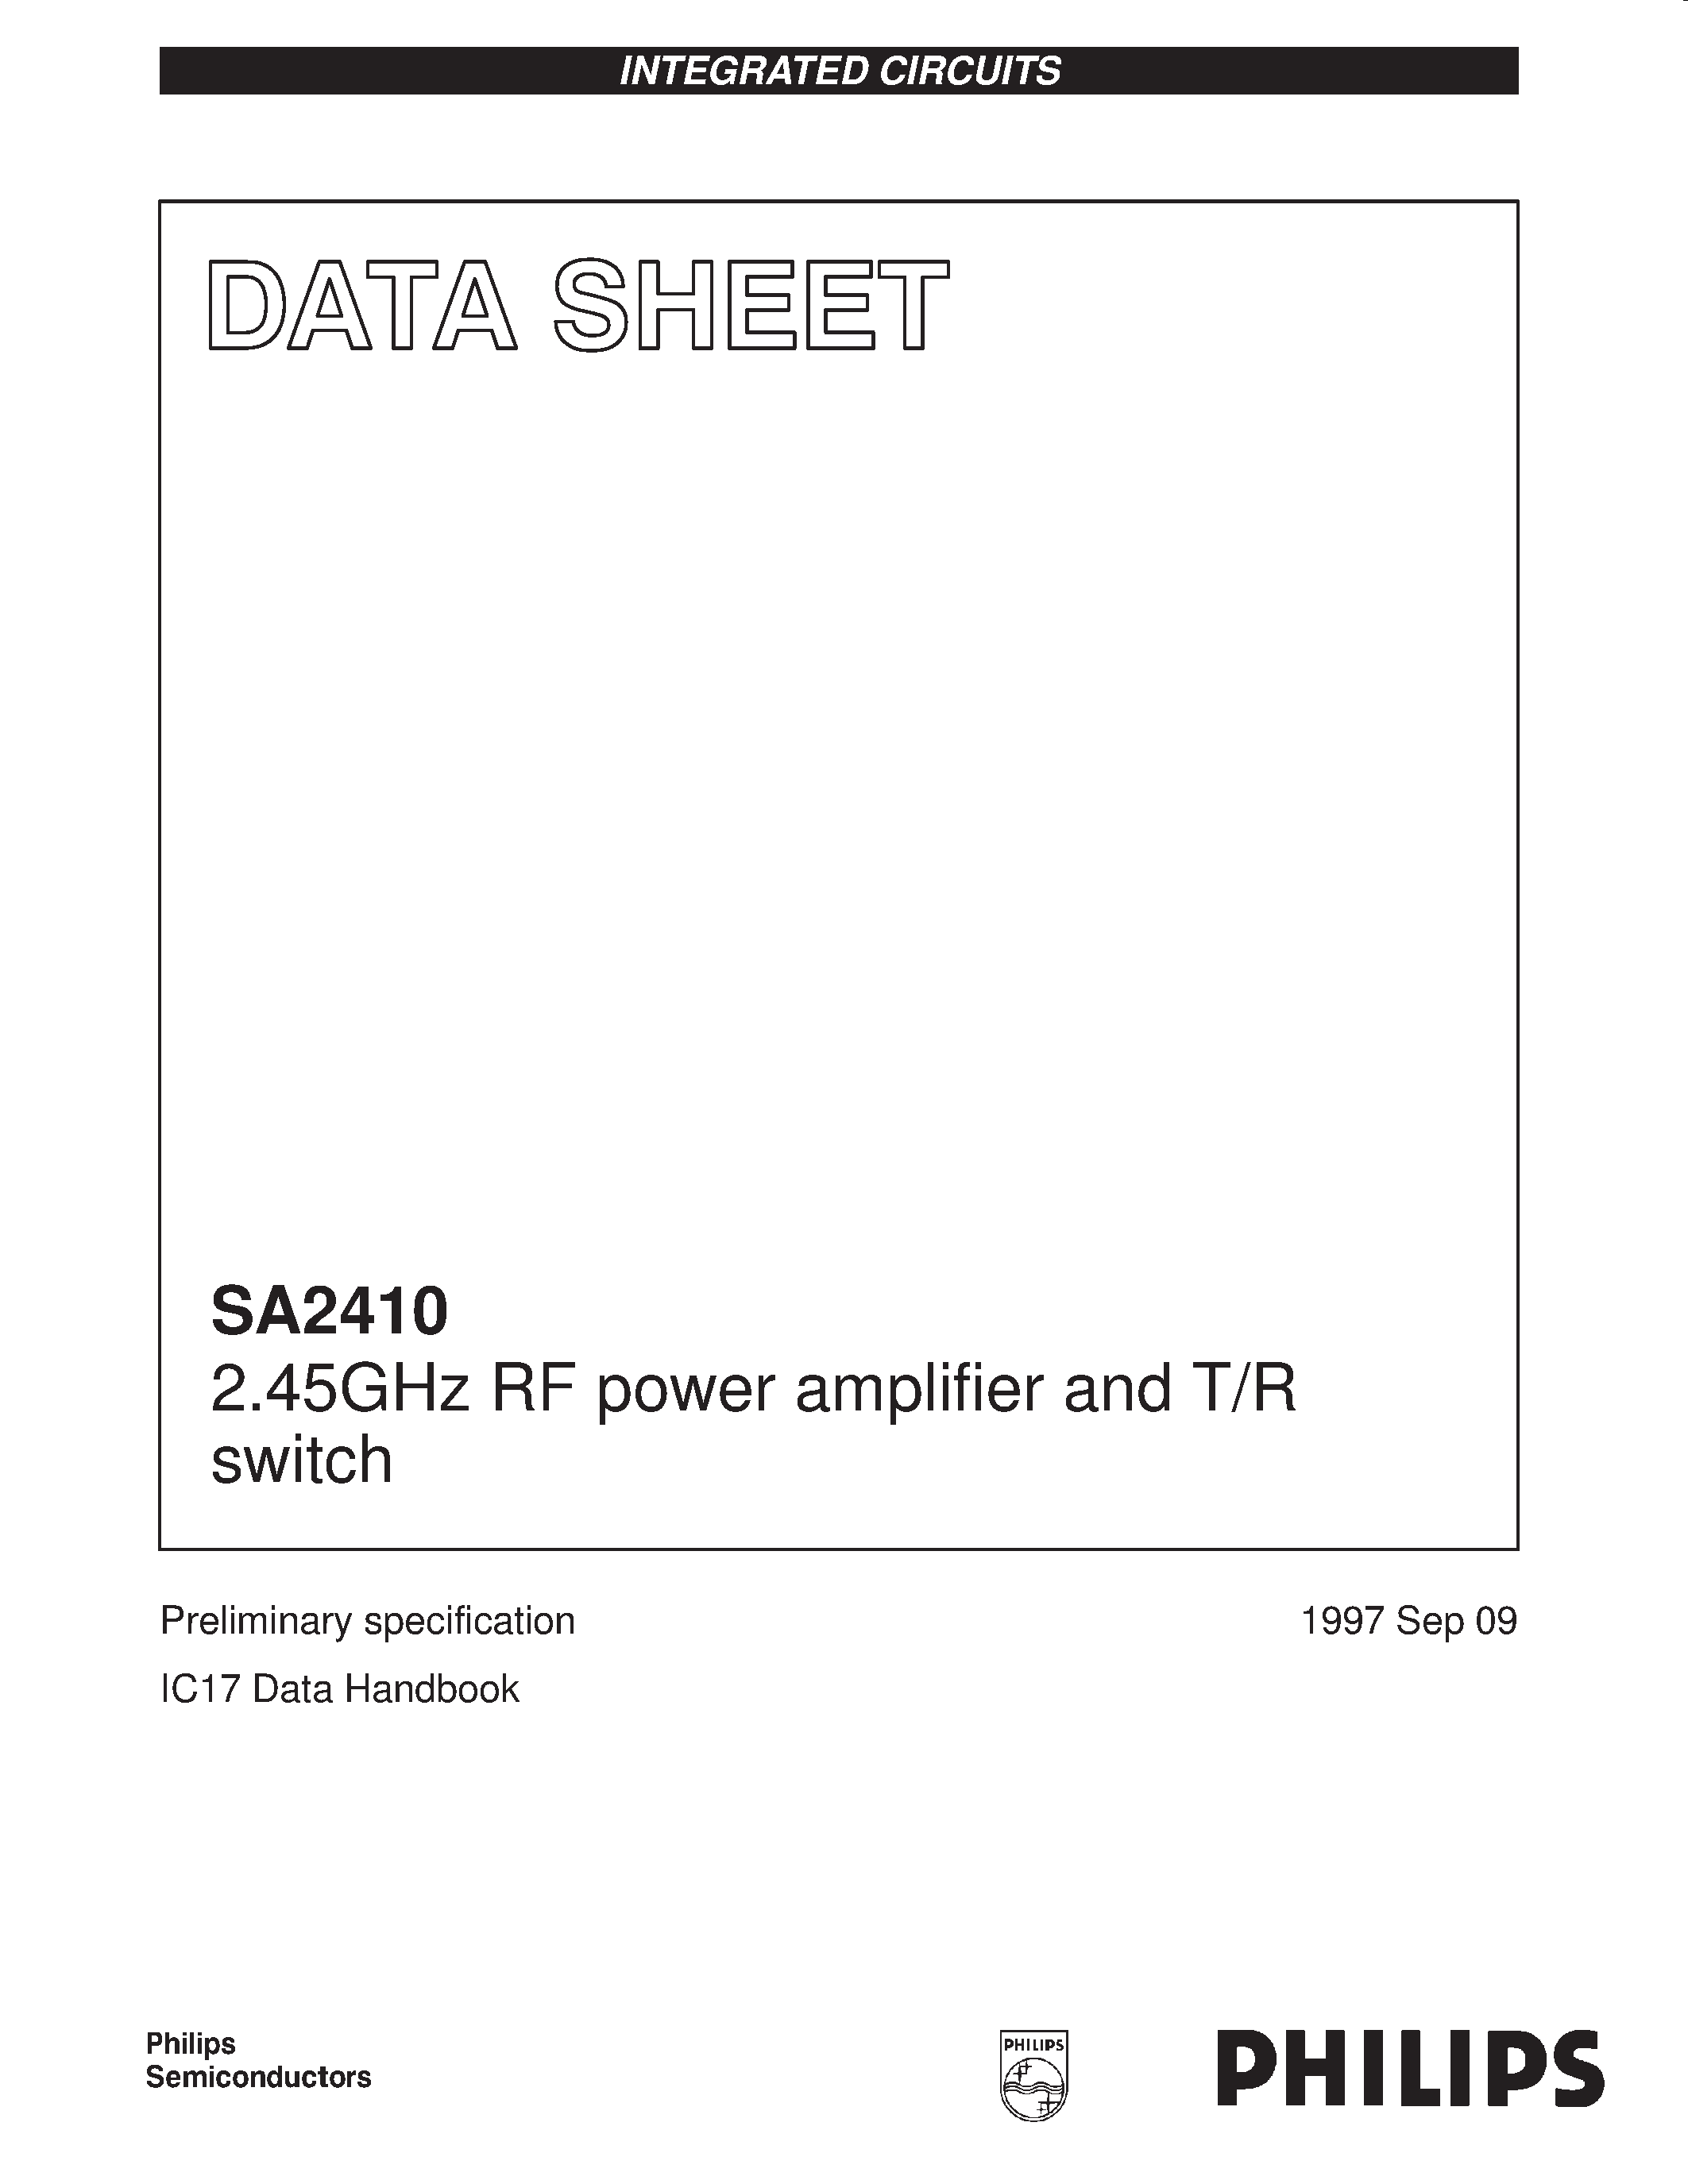 Datasheet SA2410 - 2.45GHz RF power amplifier and T/R switch page 1